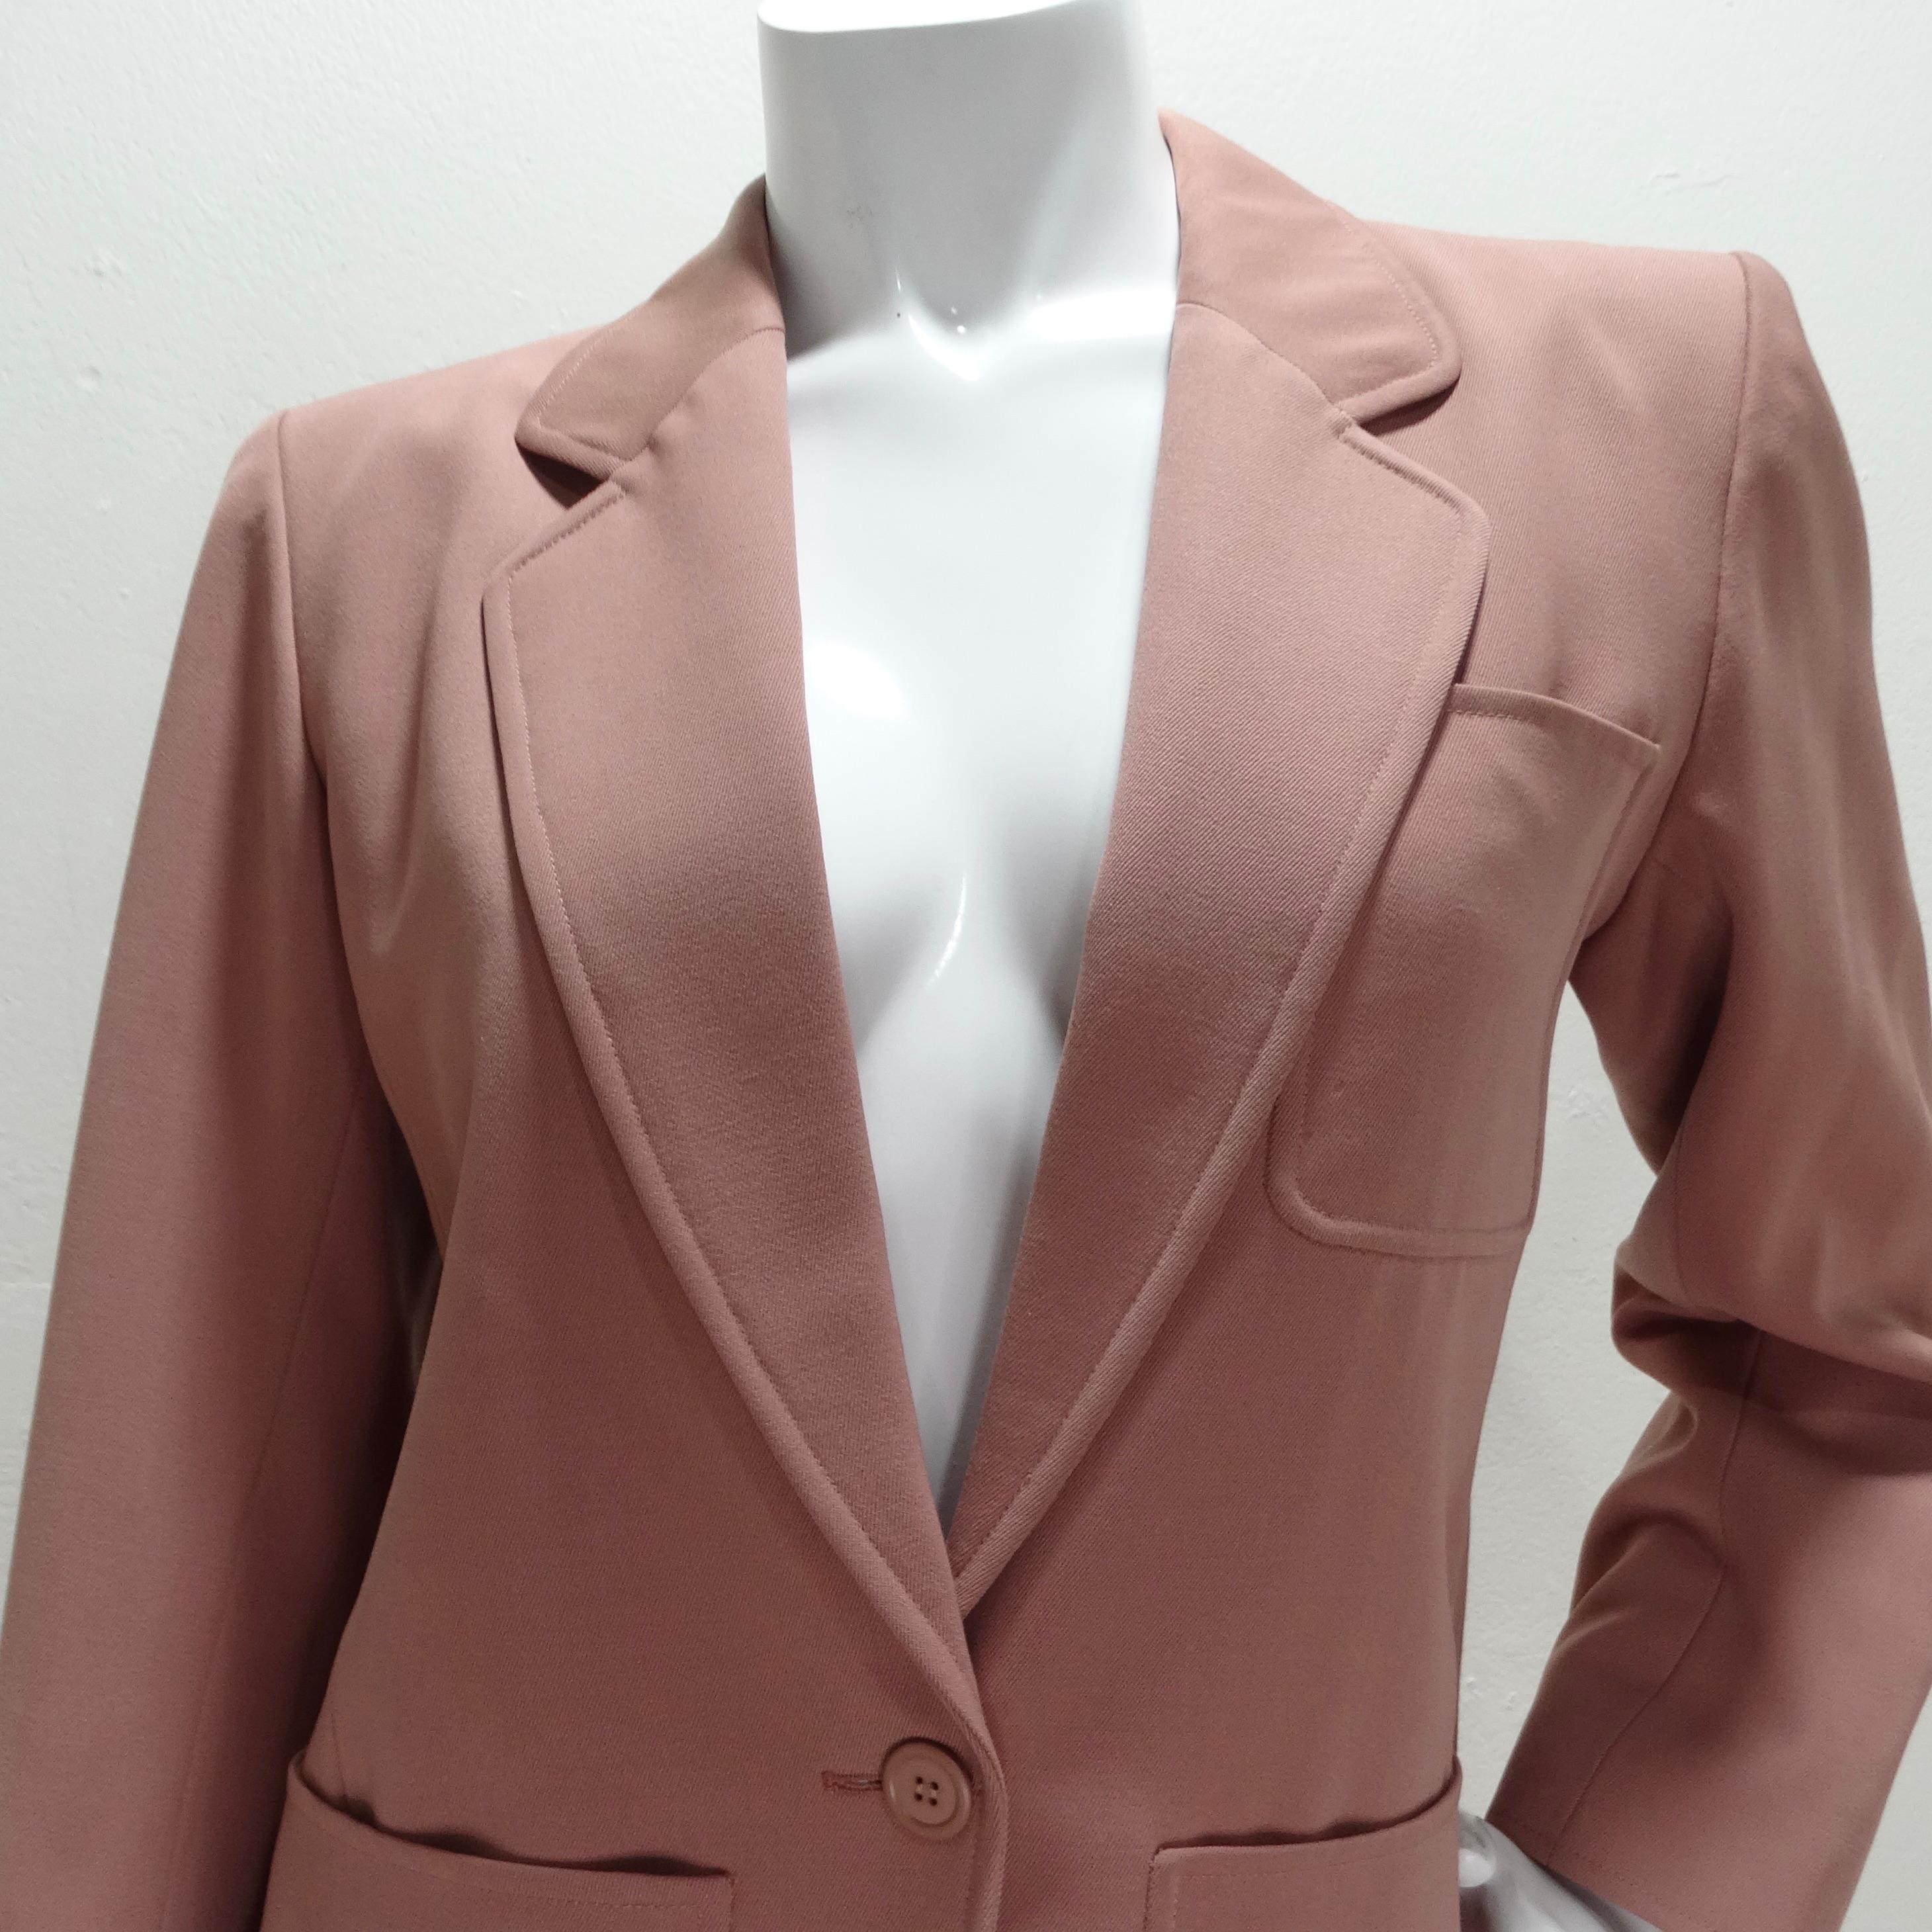 Elevate your wardrobe with the Yves Saint Laurent 1980s Blush Blazer, a classic women's blazer that embodies timeless elegance. This beautifully crafted blazer features a structured collar, two spacious center pockets, and a breast pocket, all